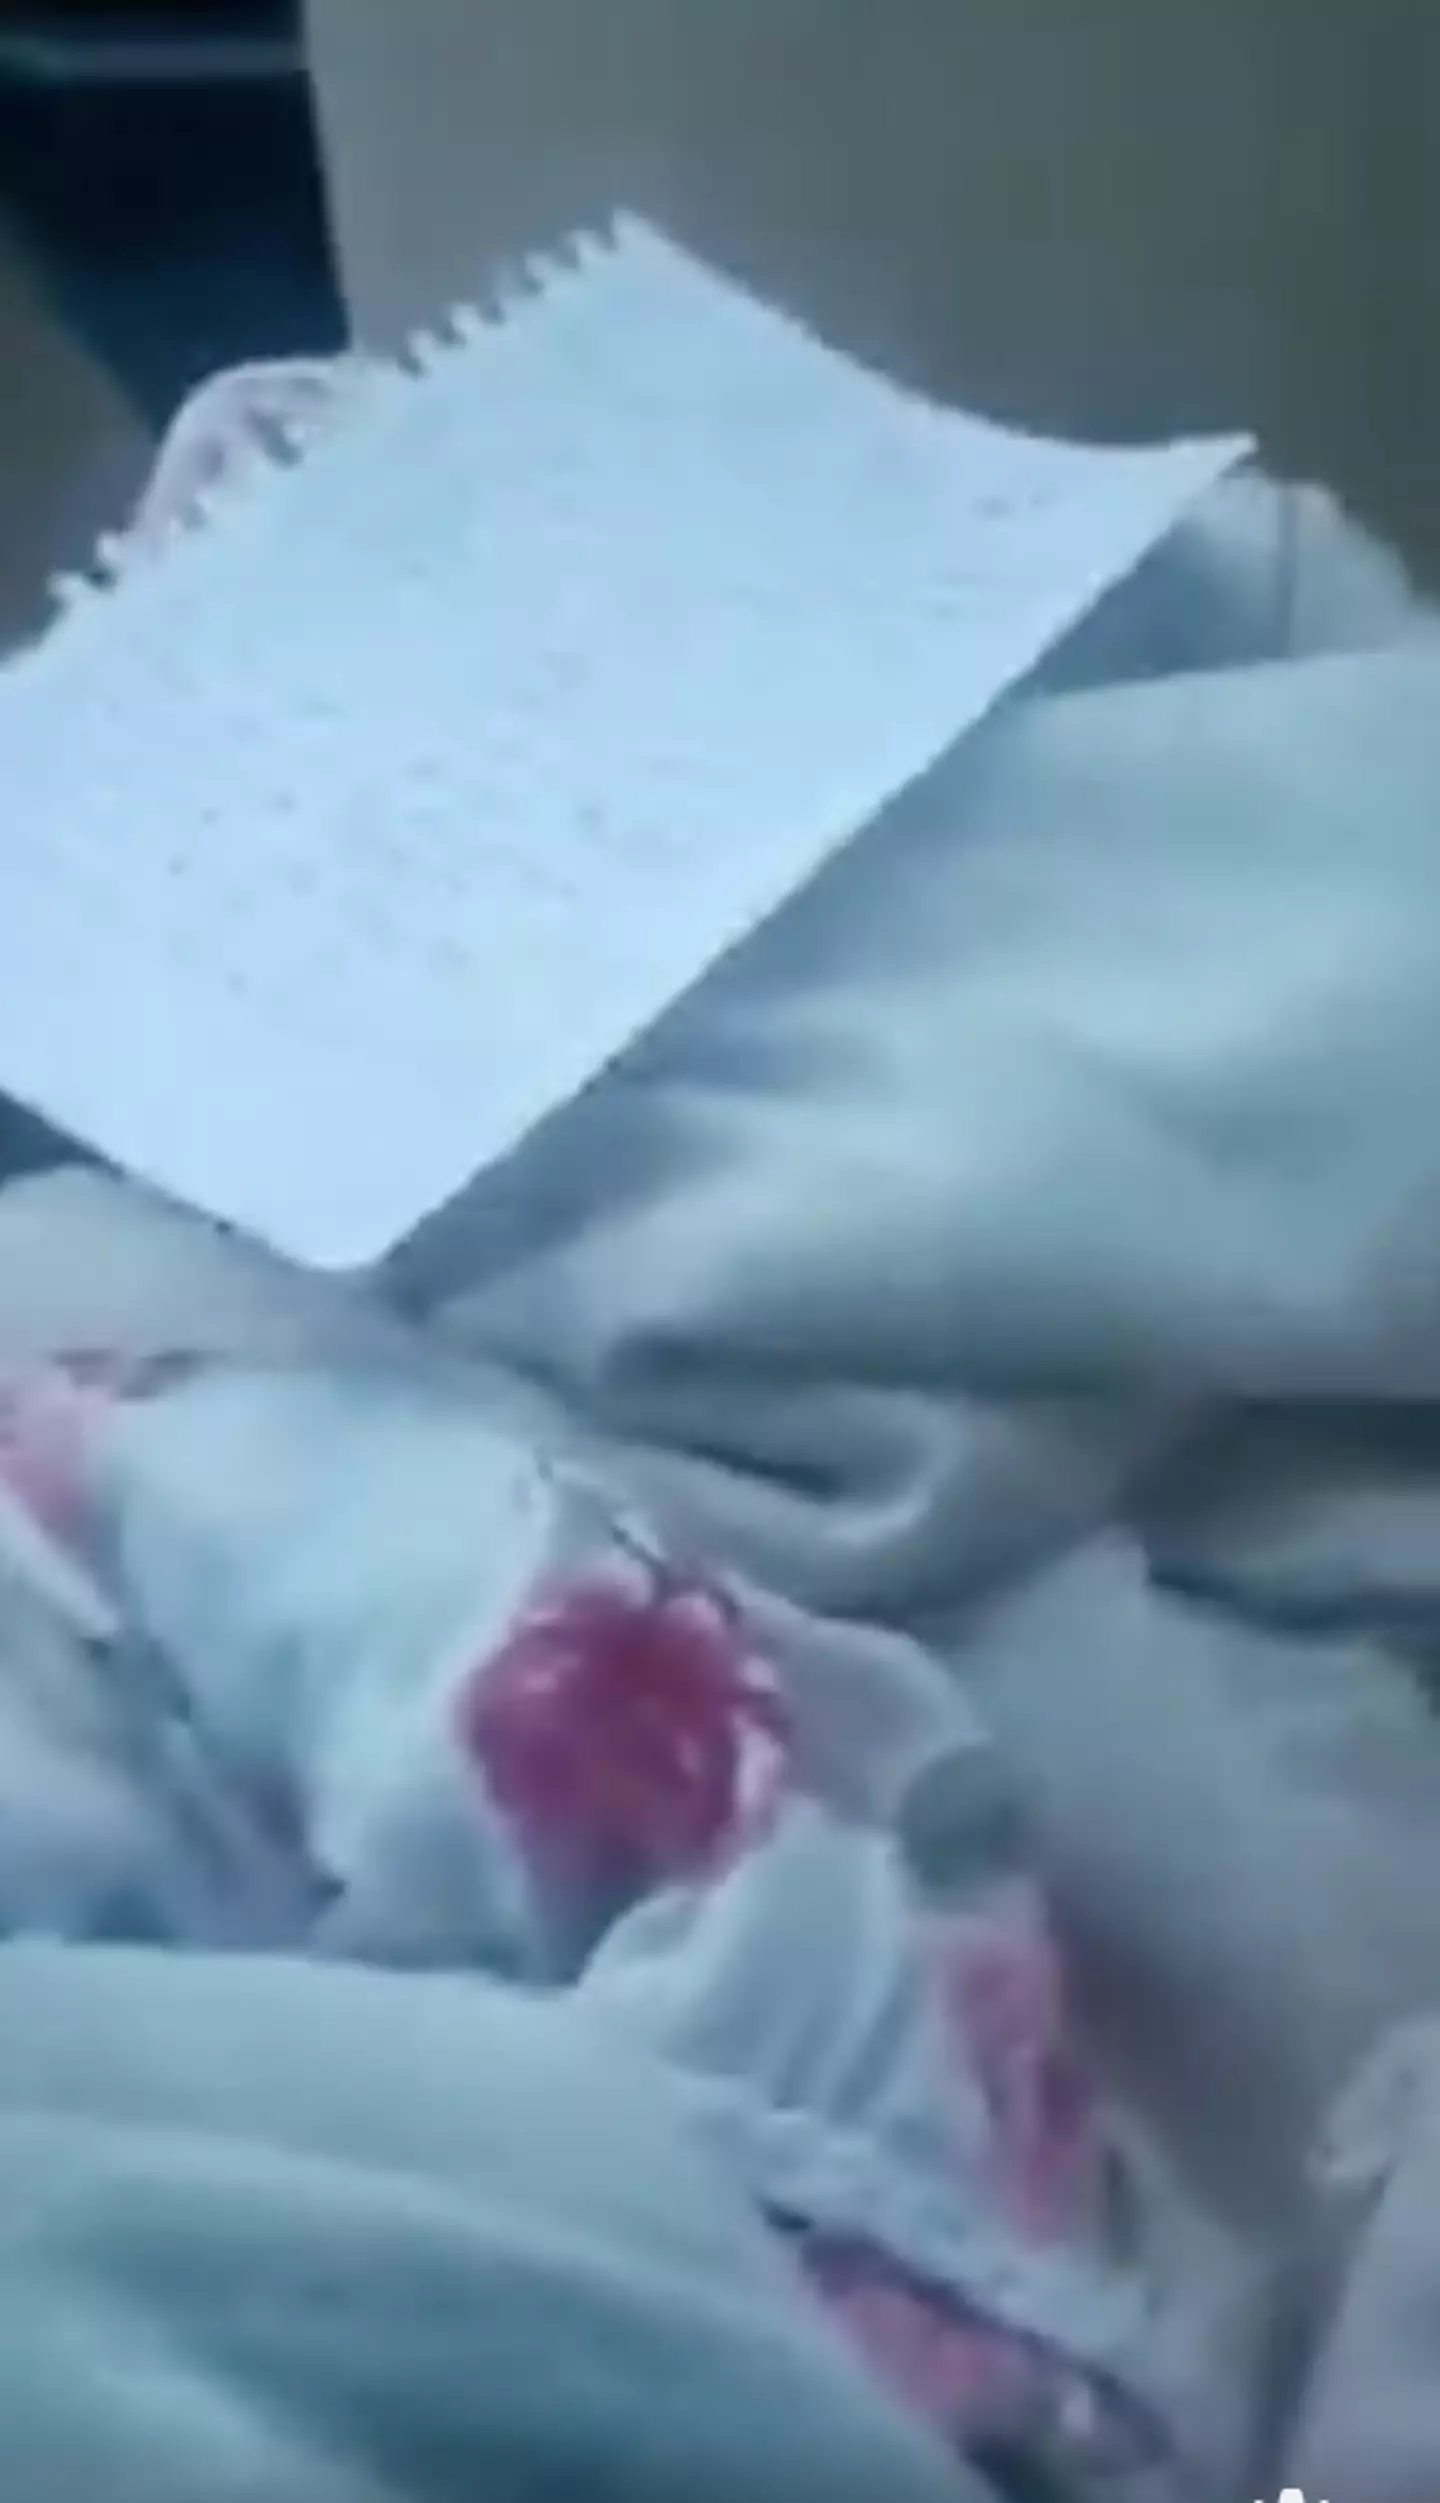 The baby was wrapped in blankets alongside the note.